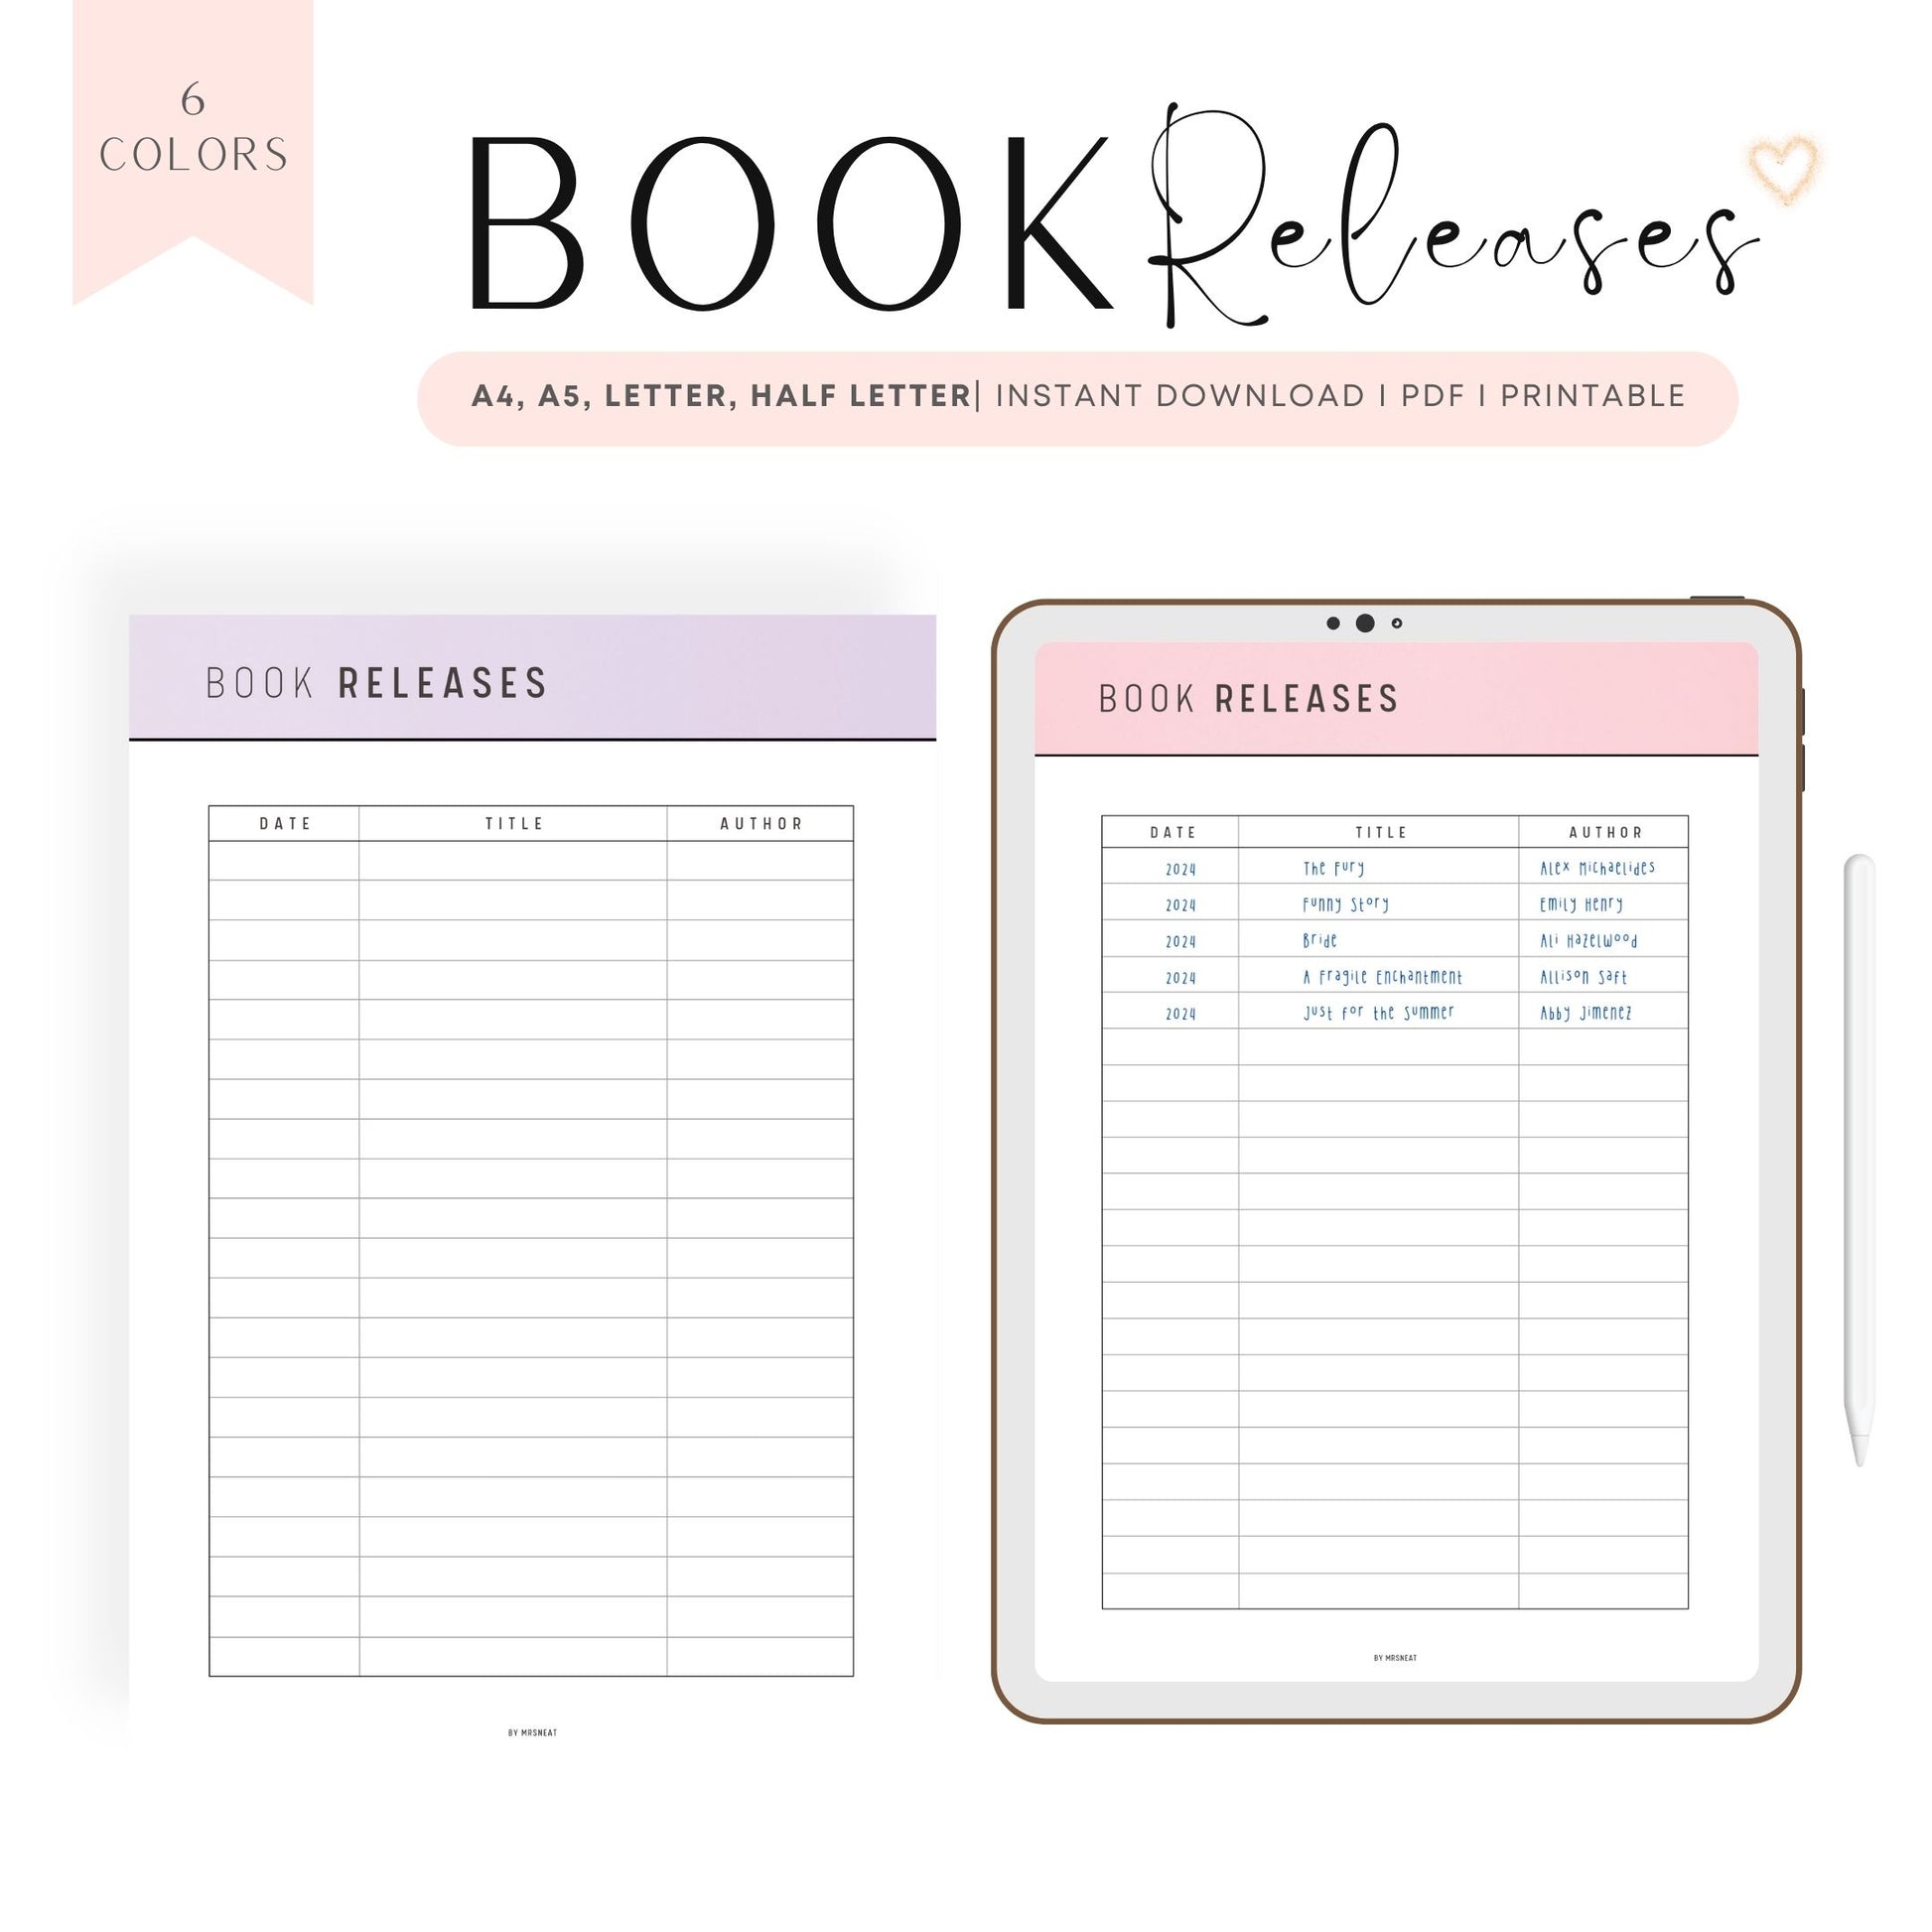 Upcoming Book Releases Template Printable